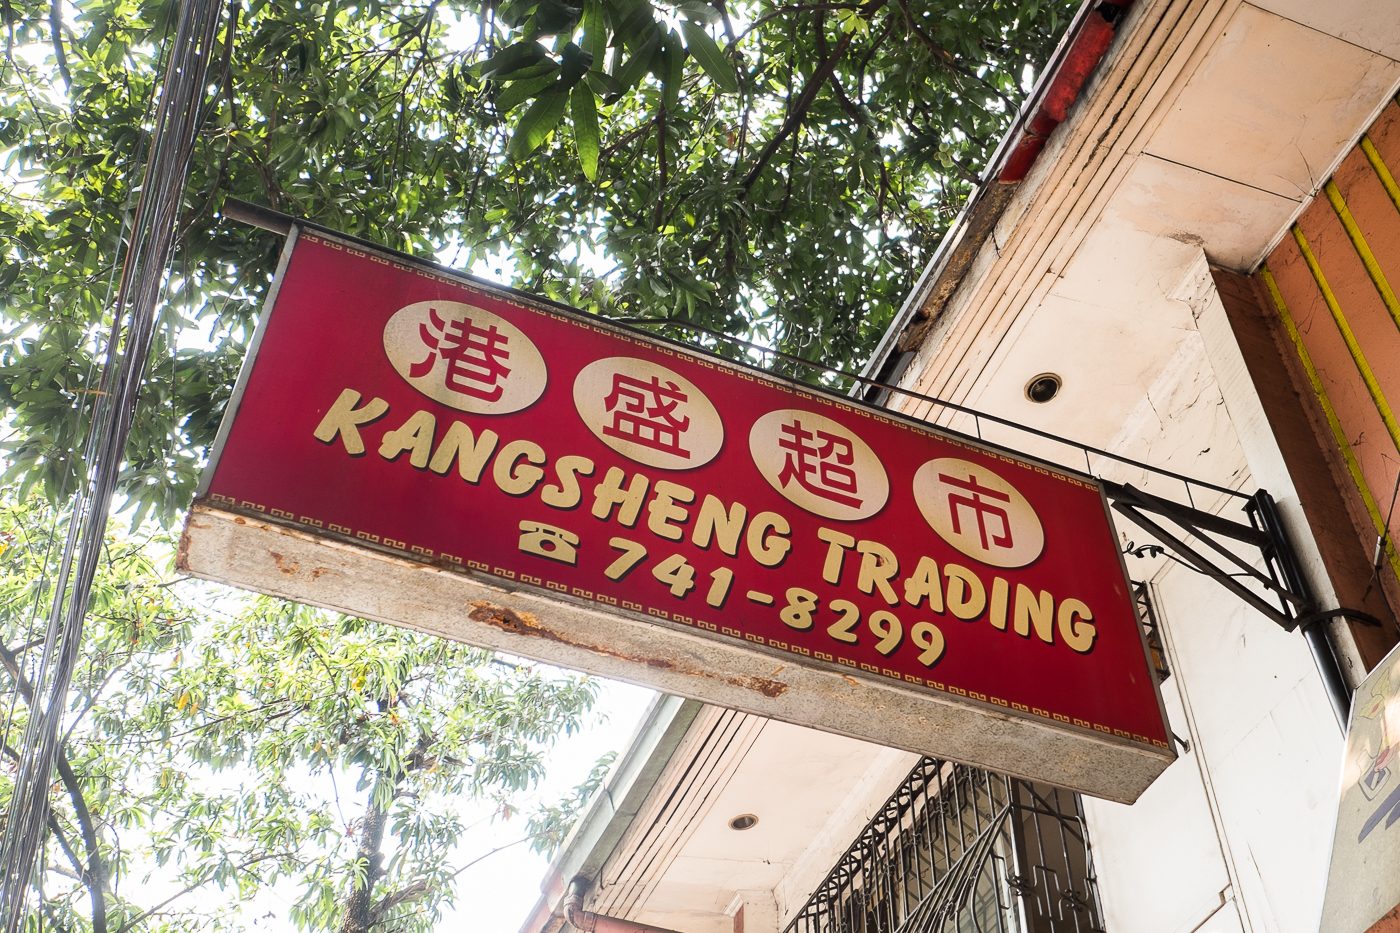 Kangsheng trading sells various goods from China, Thailand, and the US. 